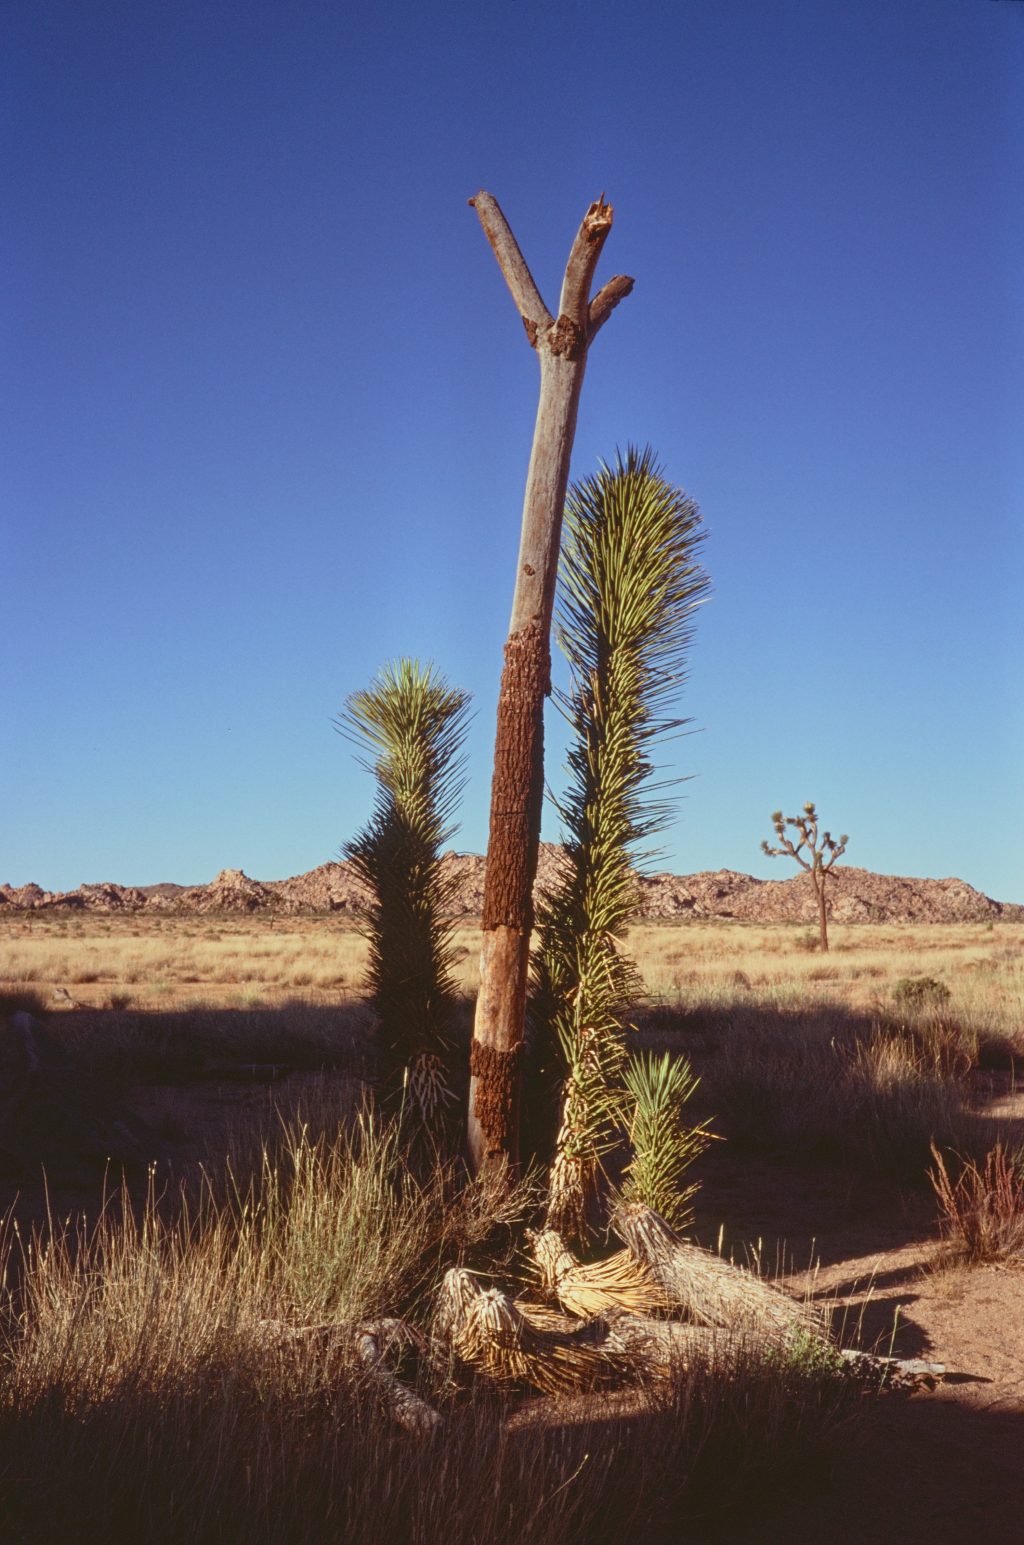 Fuji Velvia 100 Leica CL, paired with a 40mm Summicron Joshua Tree National Park